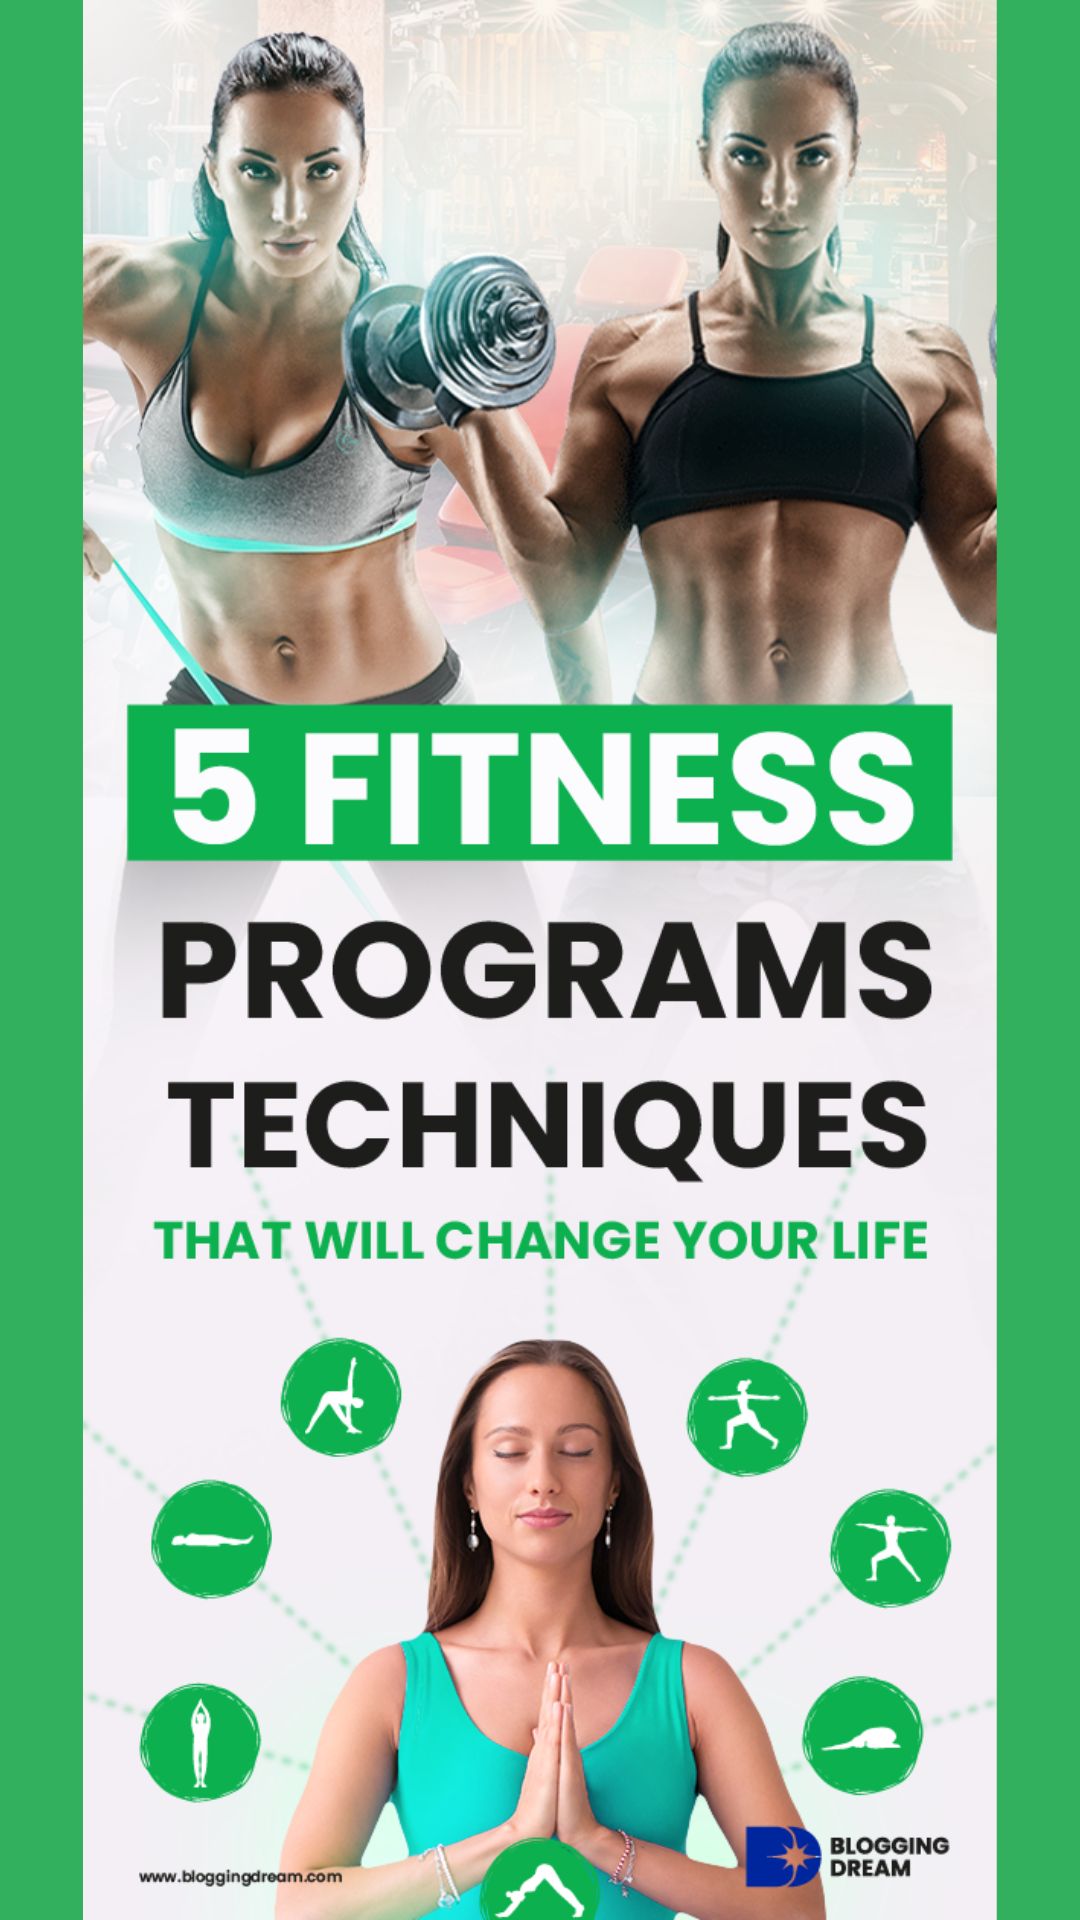 5  FITNESS PROGRAMS AND TECHNIQUES THAT WILL CHANGE YOUR LIFE